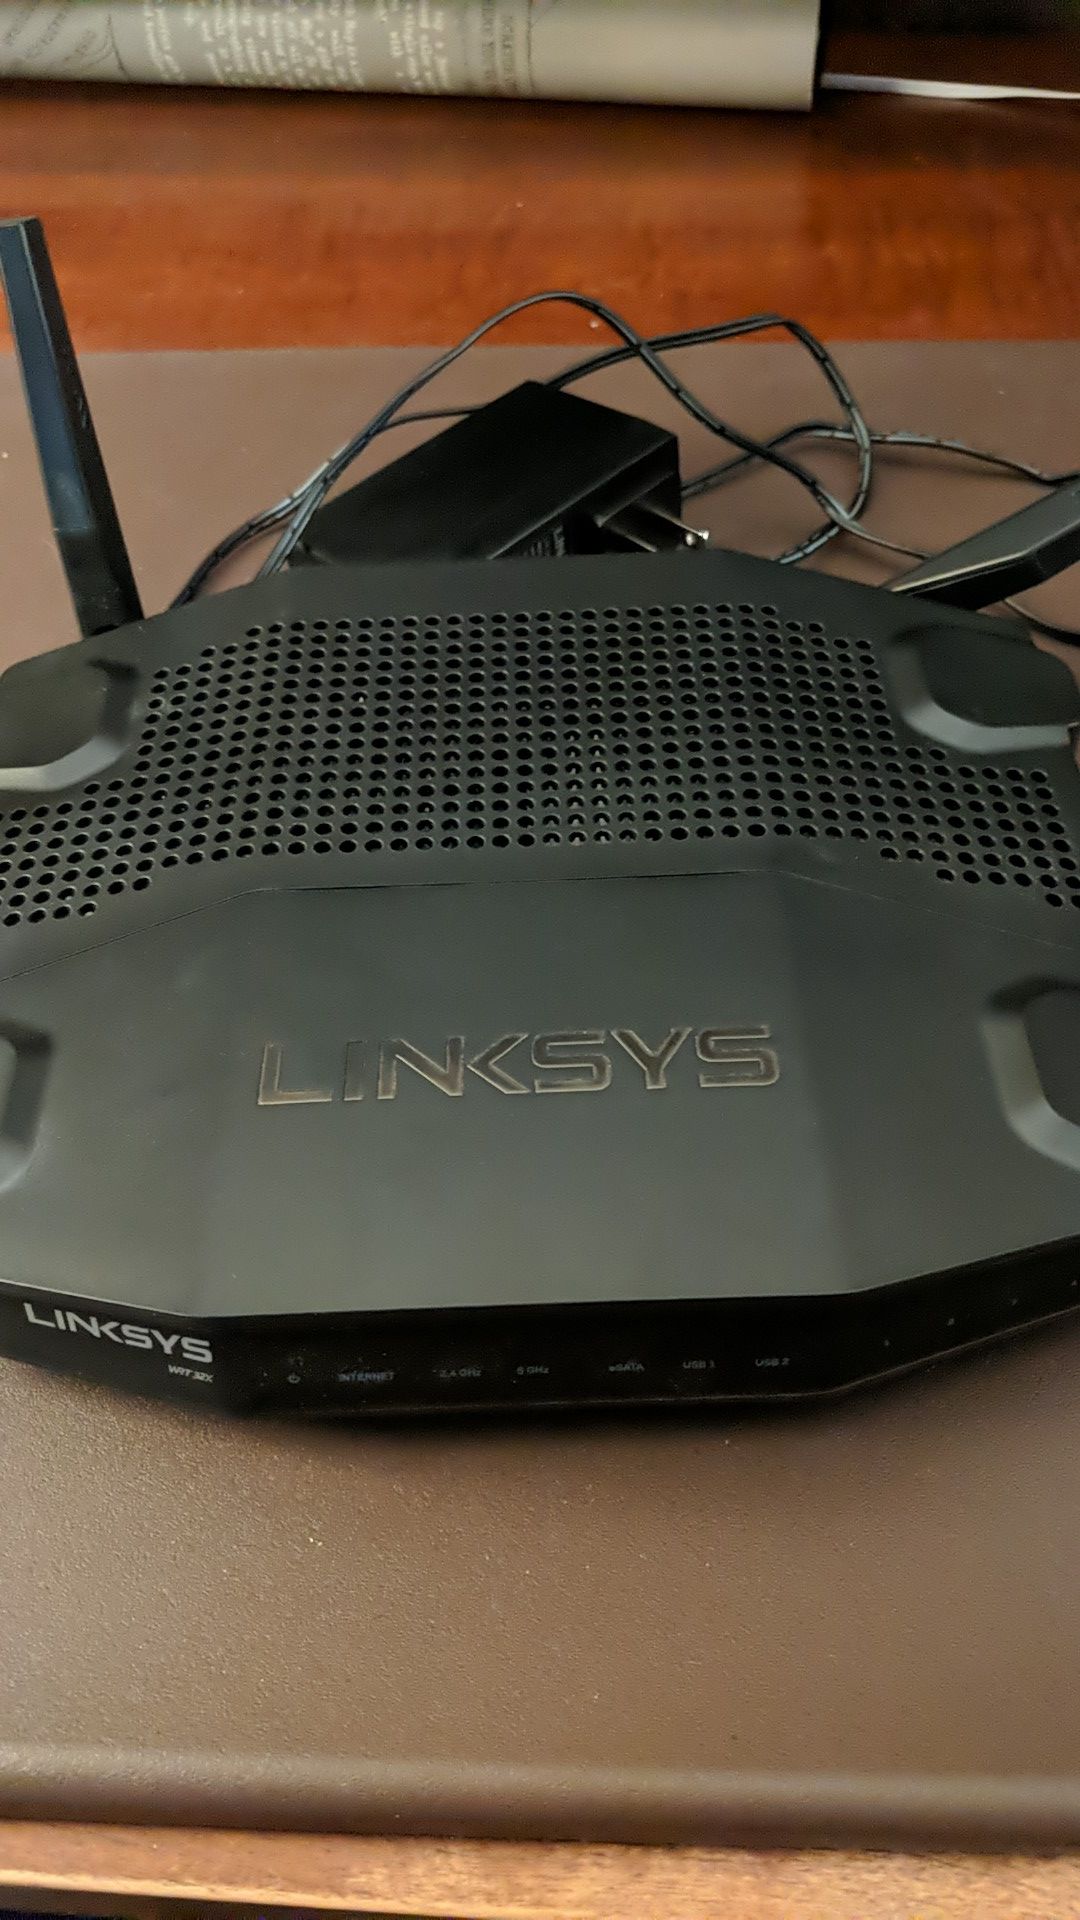 Linksys WRT32X gaming router